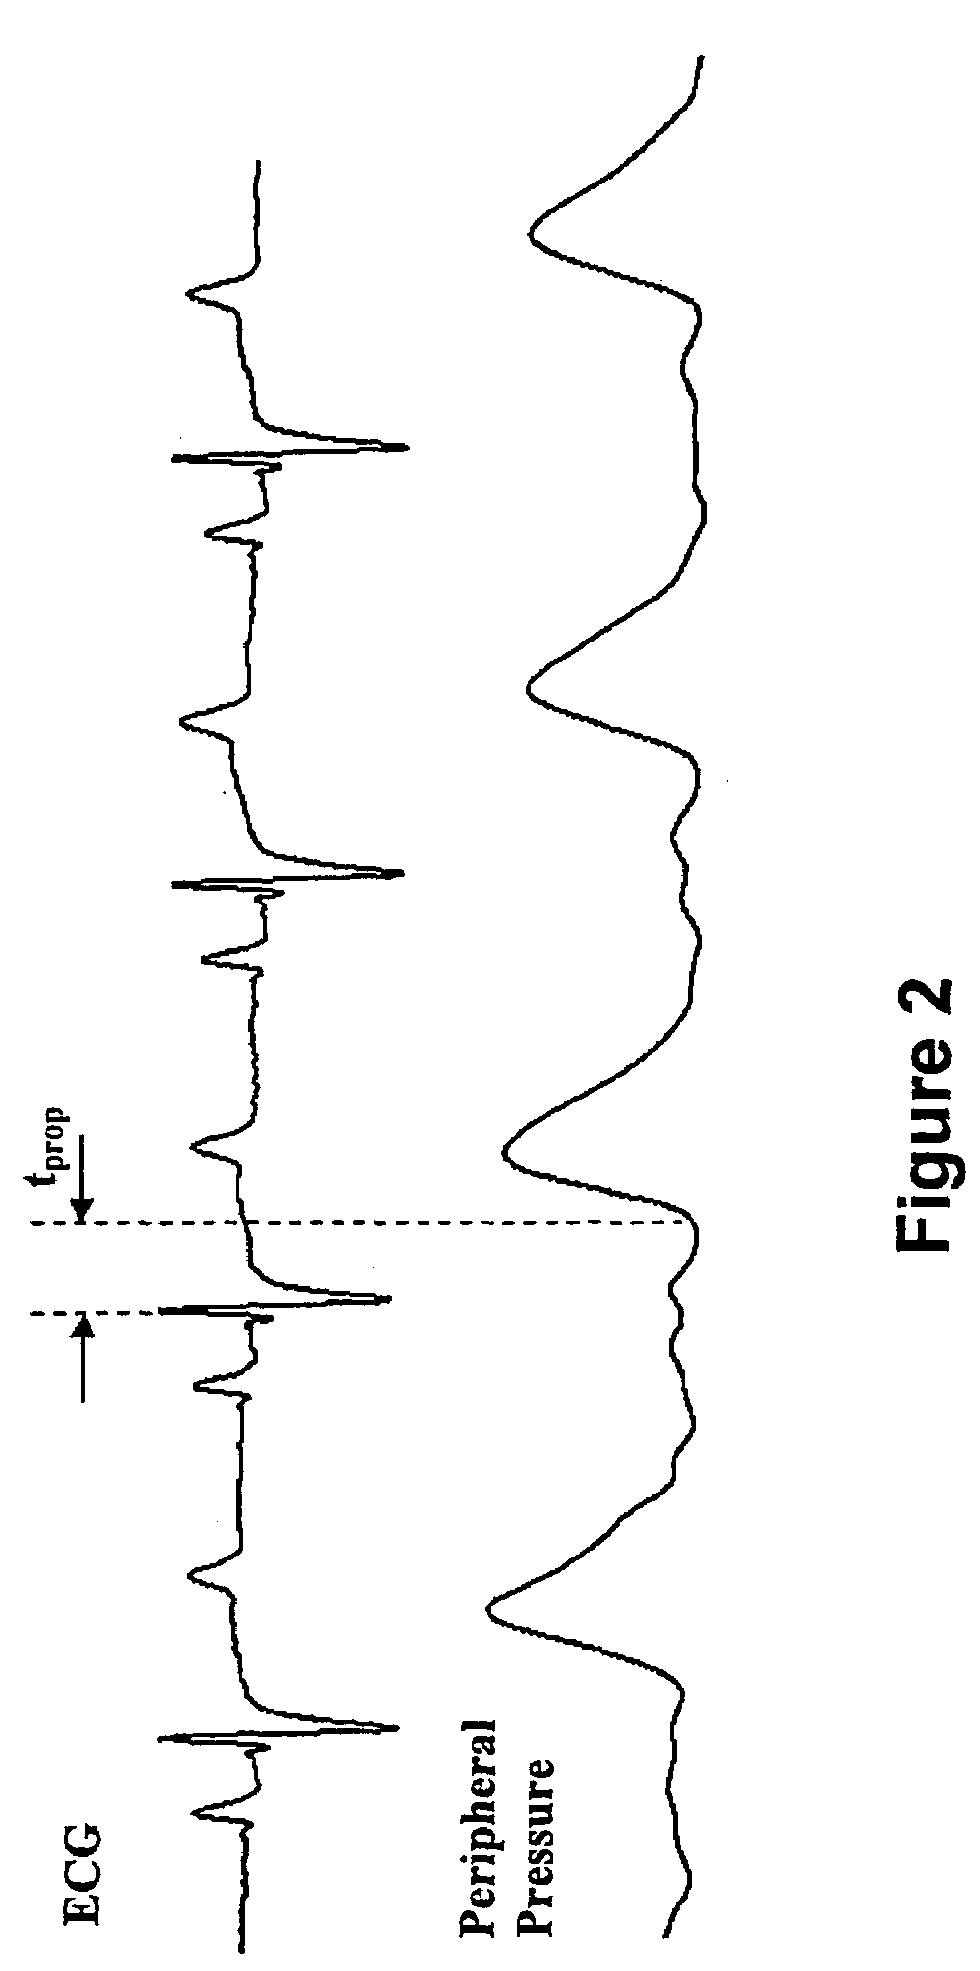 Method and apparatus for continuous assessment of a cardiovascular parameter using the arterial pulse pressure propagation time and waveform